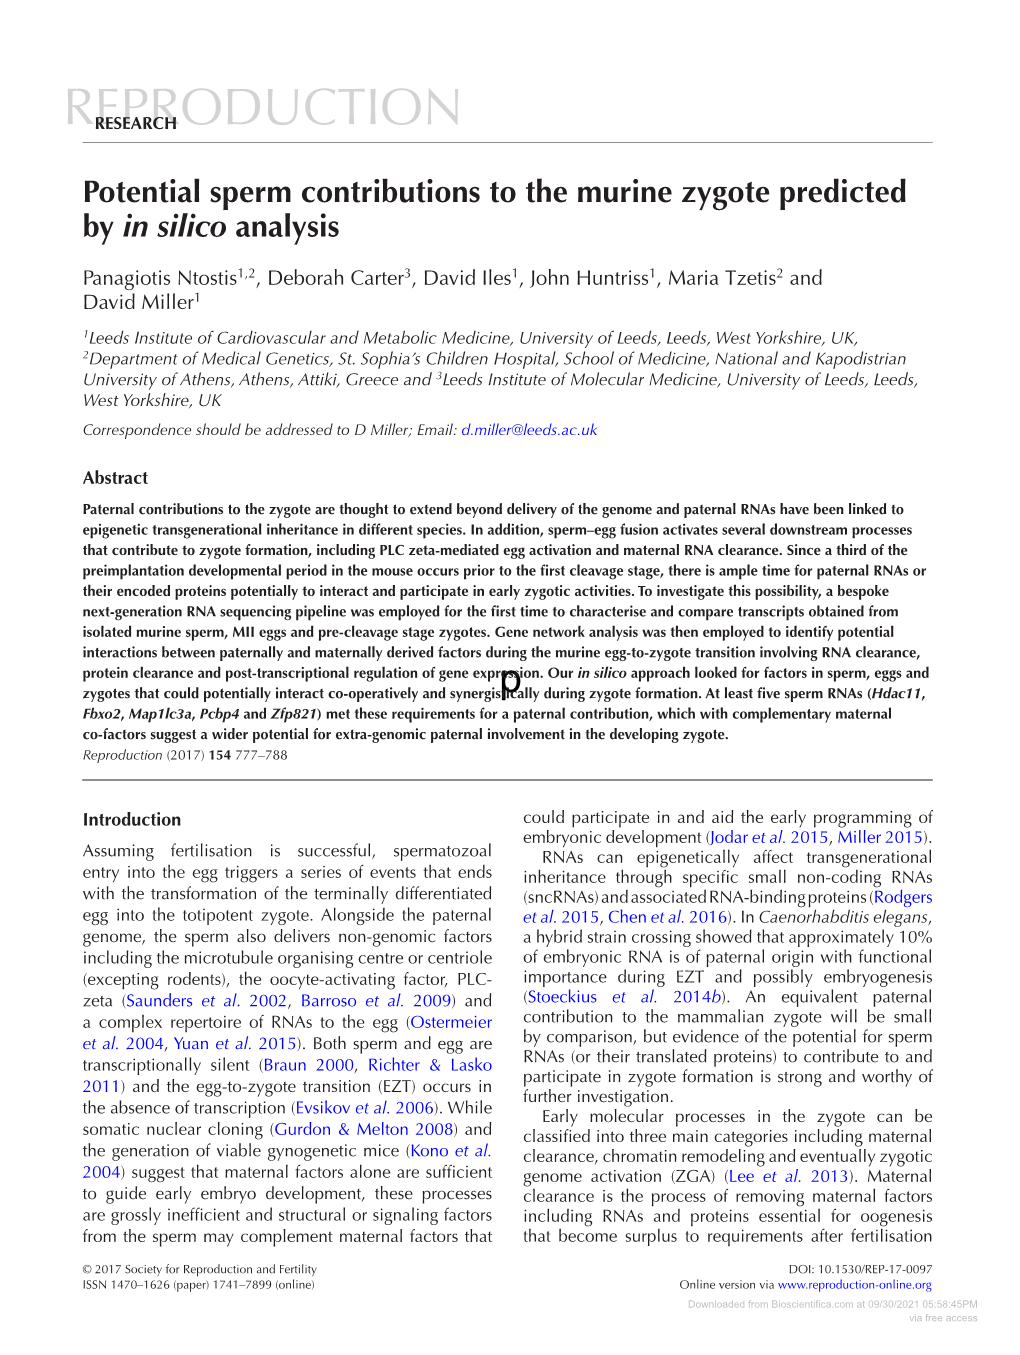 Potential Sperm Contributions to the Murine Zygote Predicted by in Silico Analysis